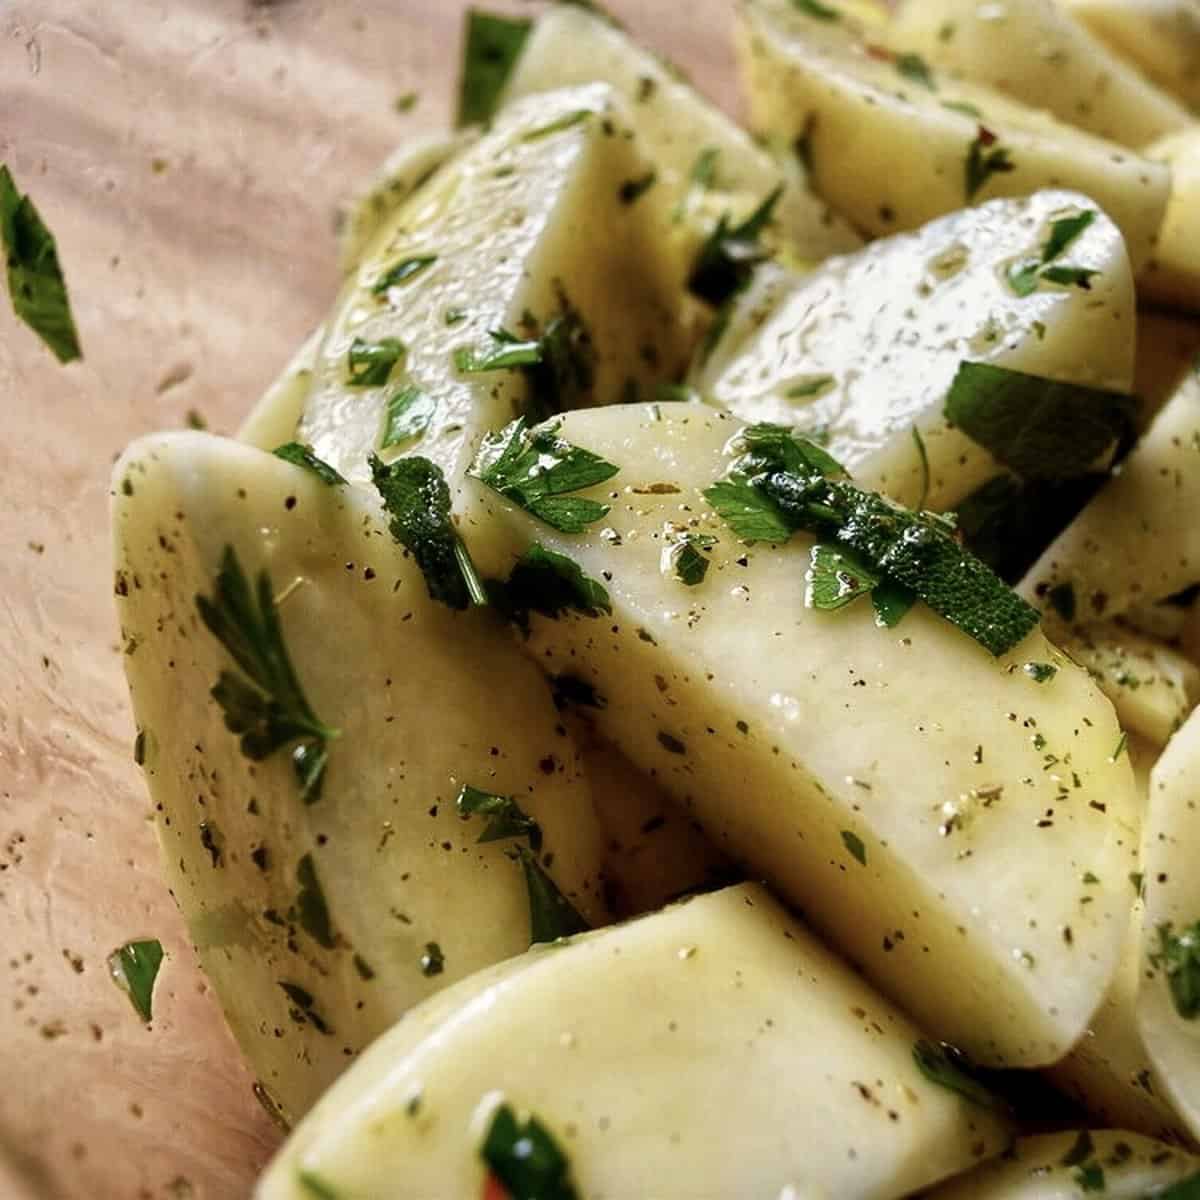 Close up shot of potatoes that are well coated with Italian herbs, spices and olive oil